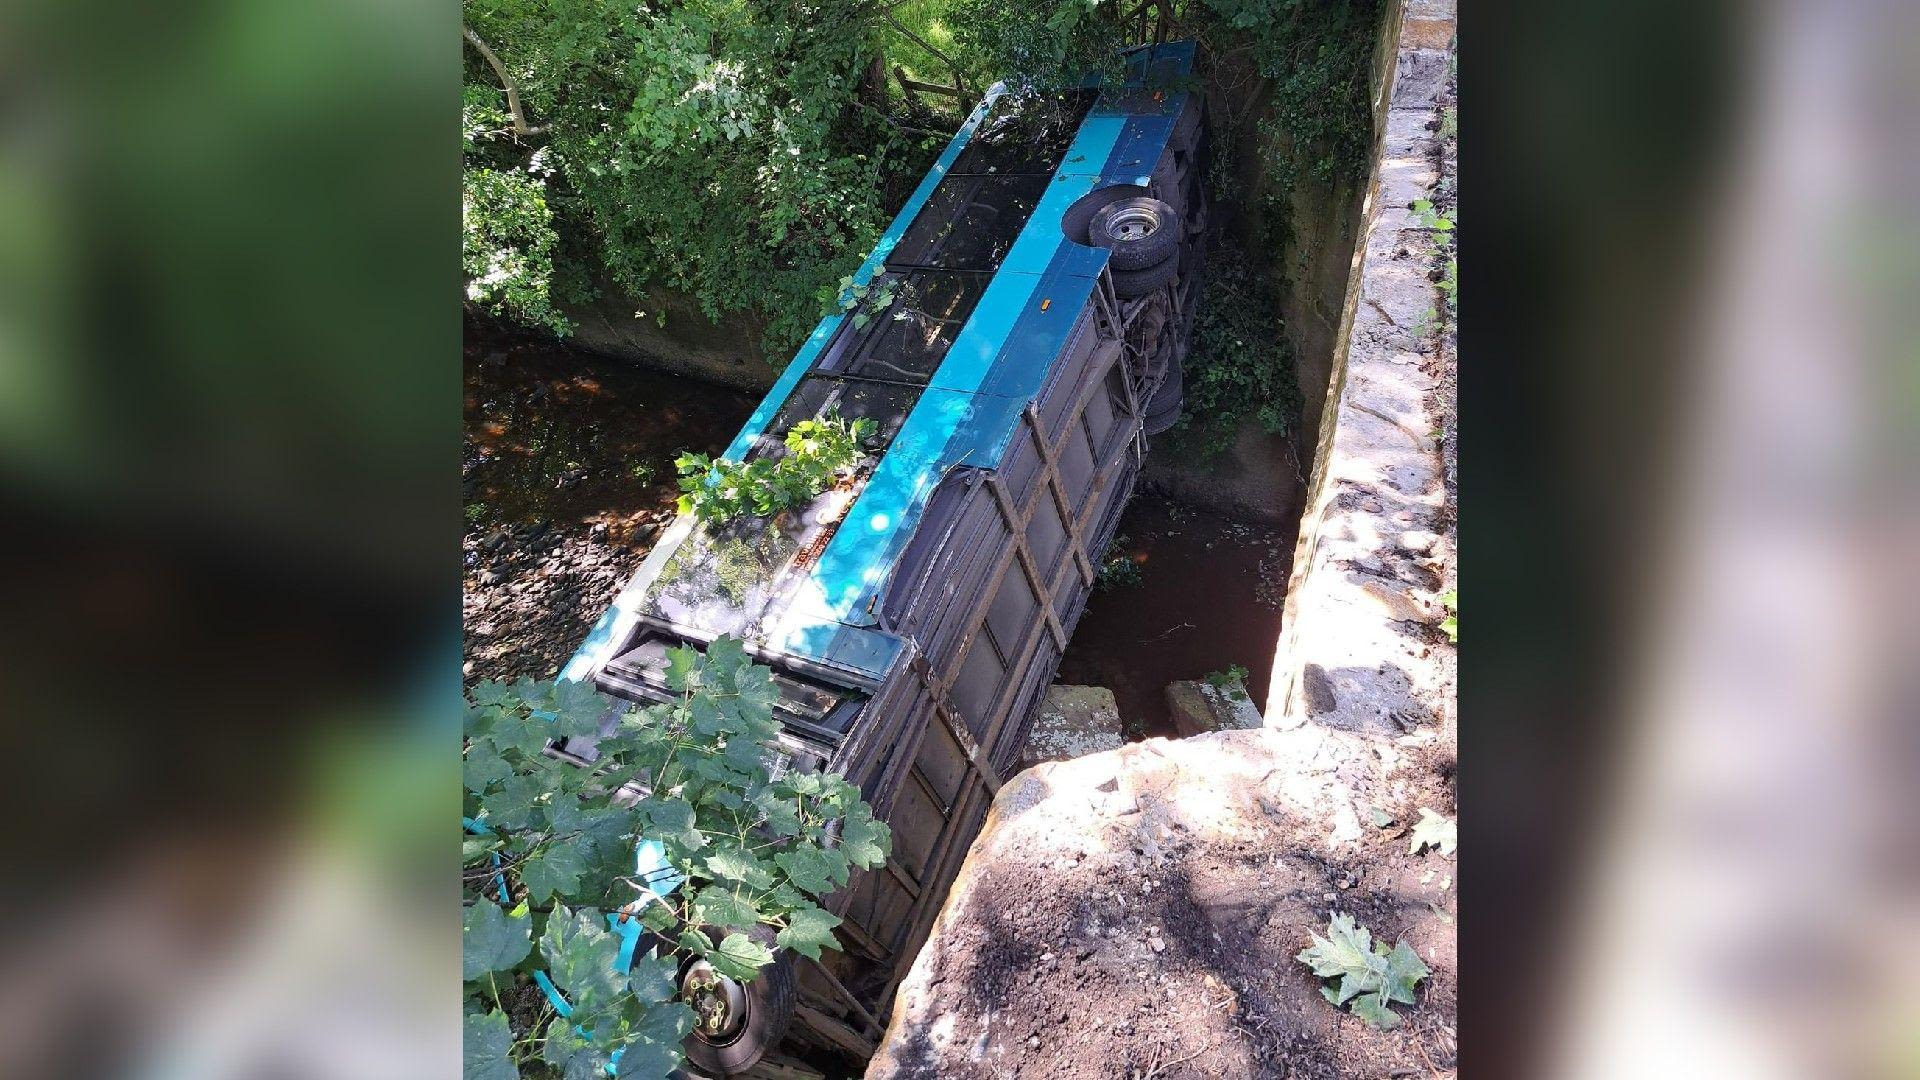 Bus removed from river after 30ft bridge fall